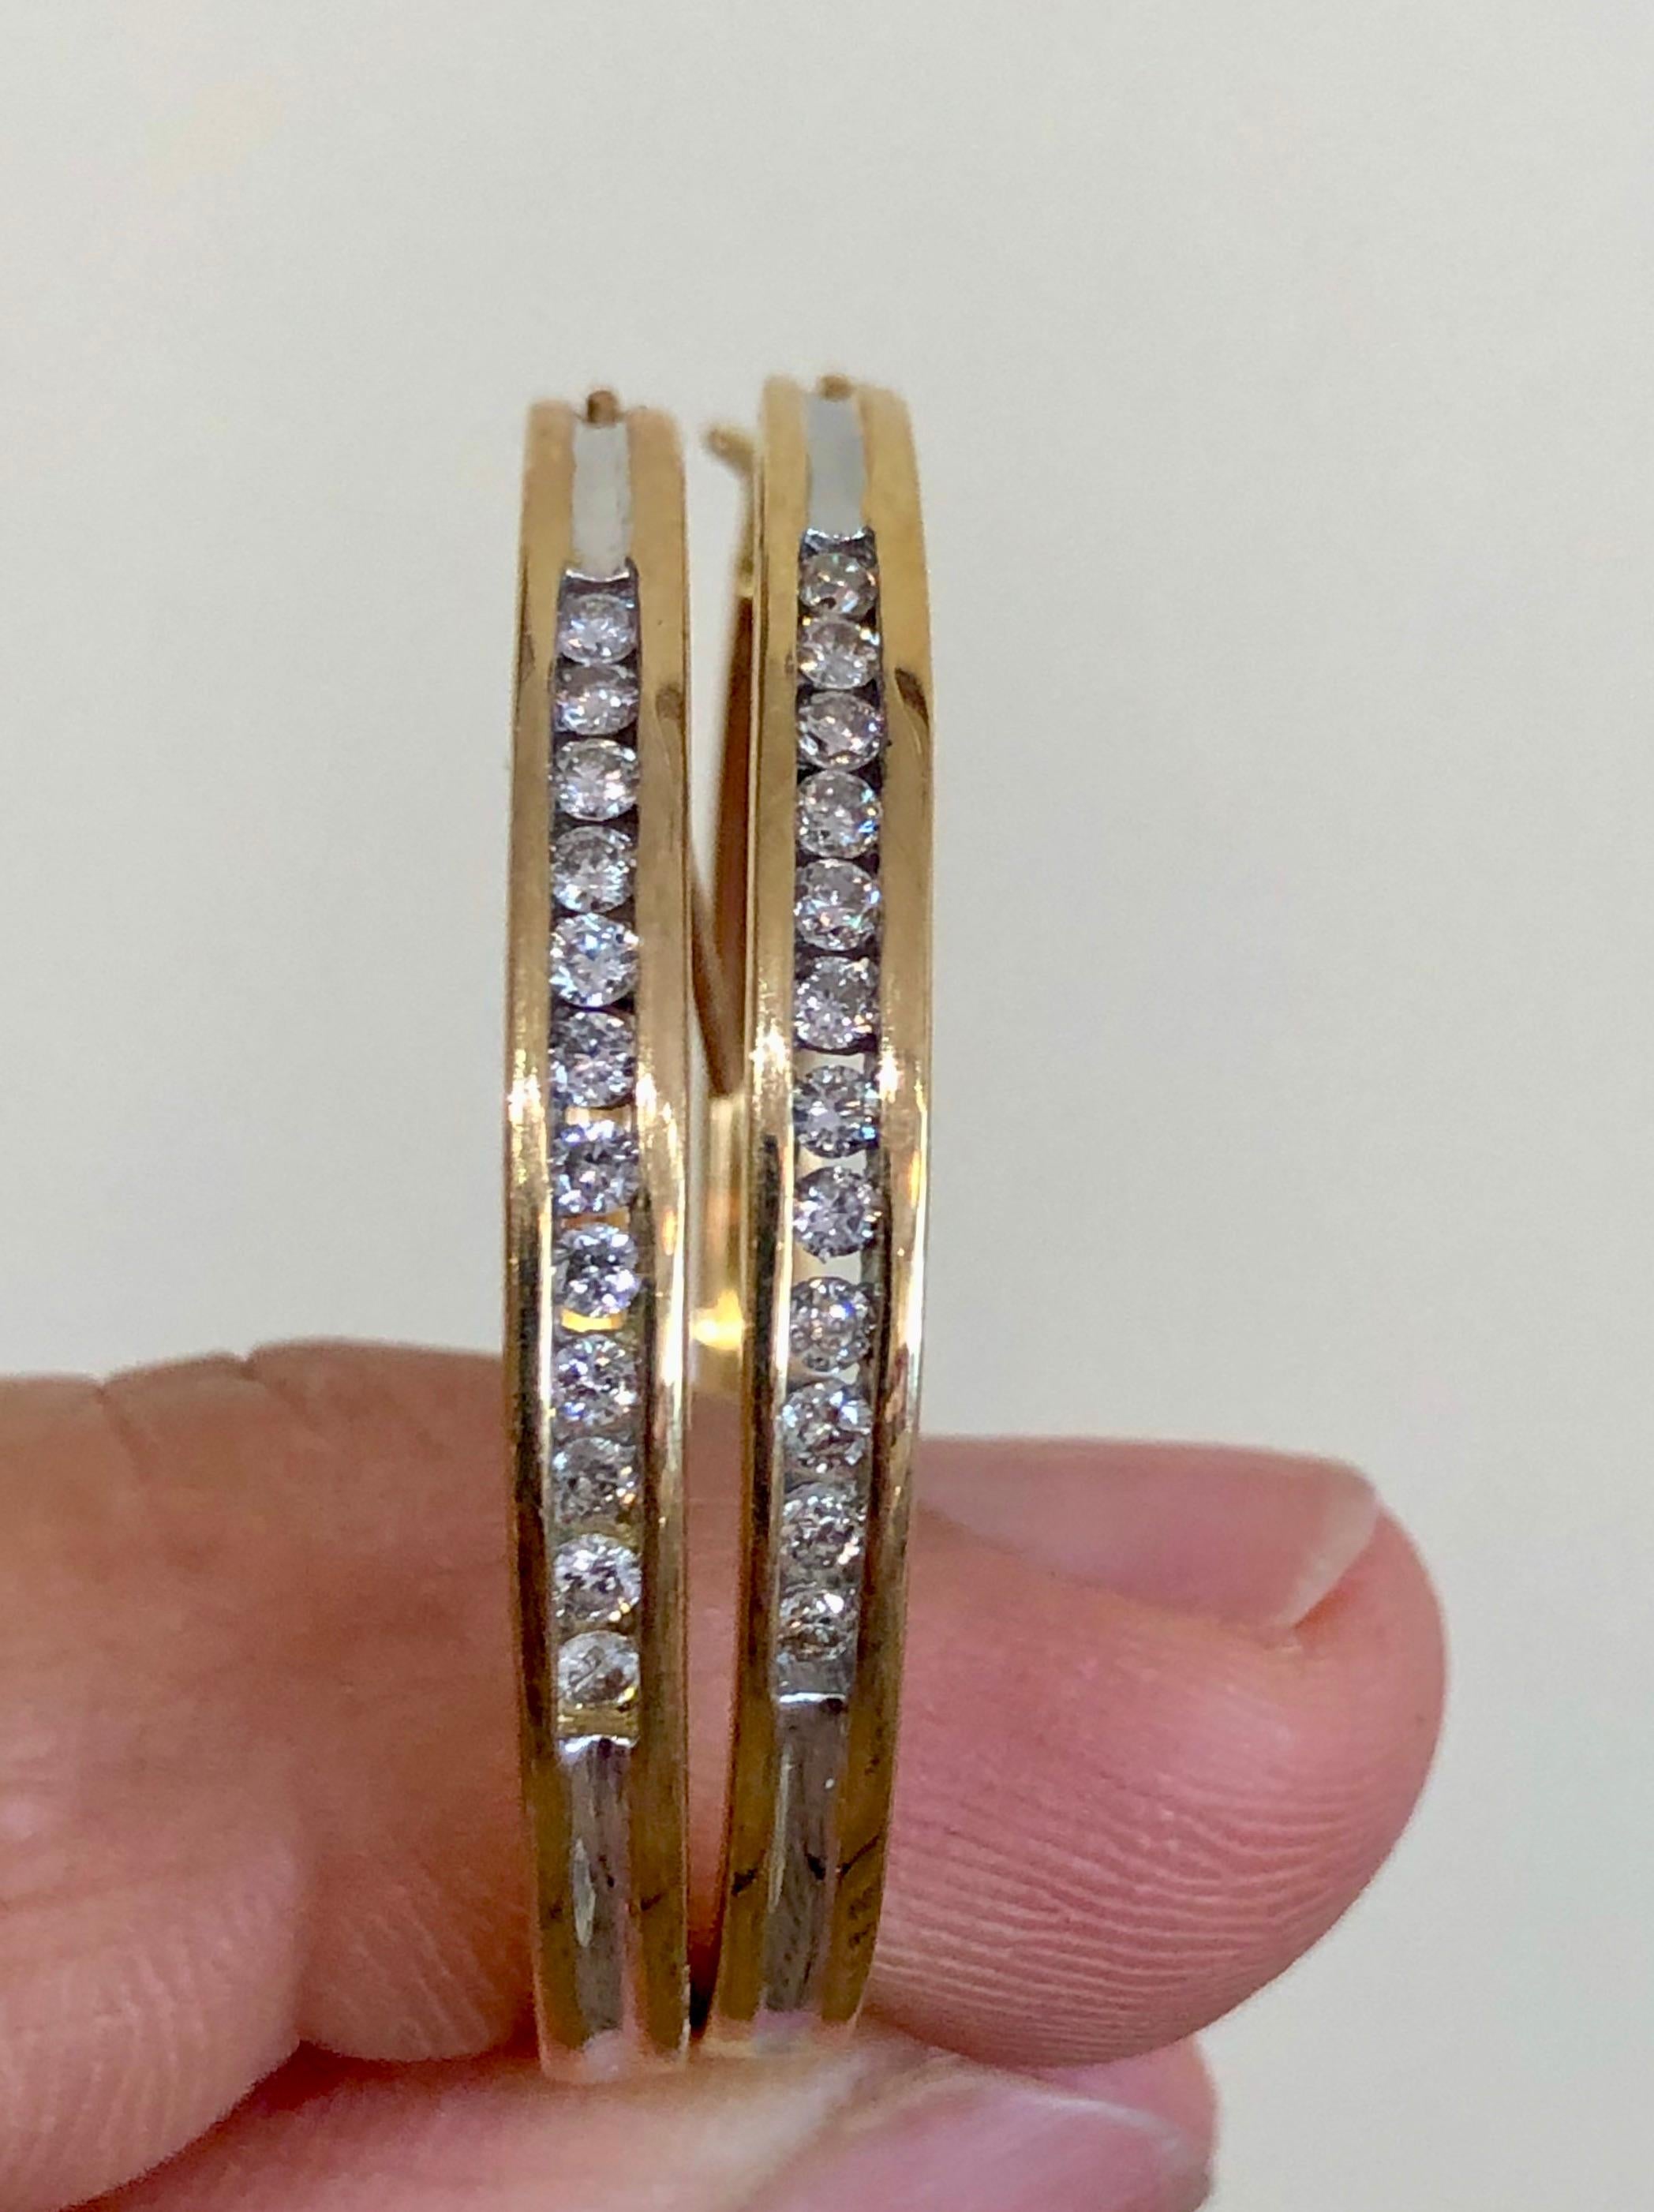 Diamonds and Yellow Gold 14K Hoop Earrings  Diameter 3.4 cm/ 1.3 Inch Diamonds Brilliant Cut  0.50 Carat, Color H-SI Clarity with Security Claps. 
Total earrings weight 8.1g